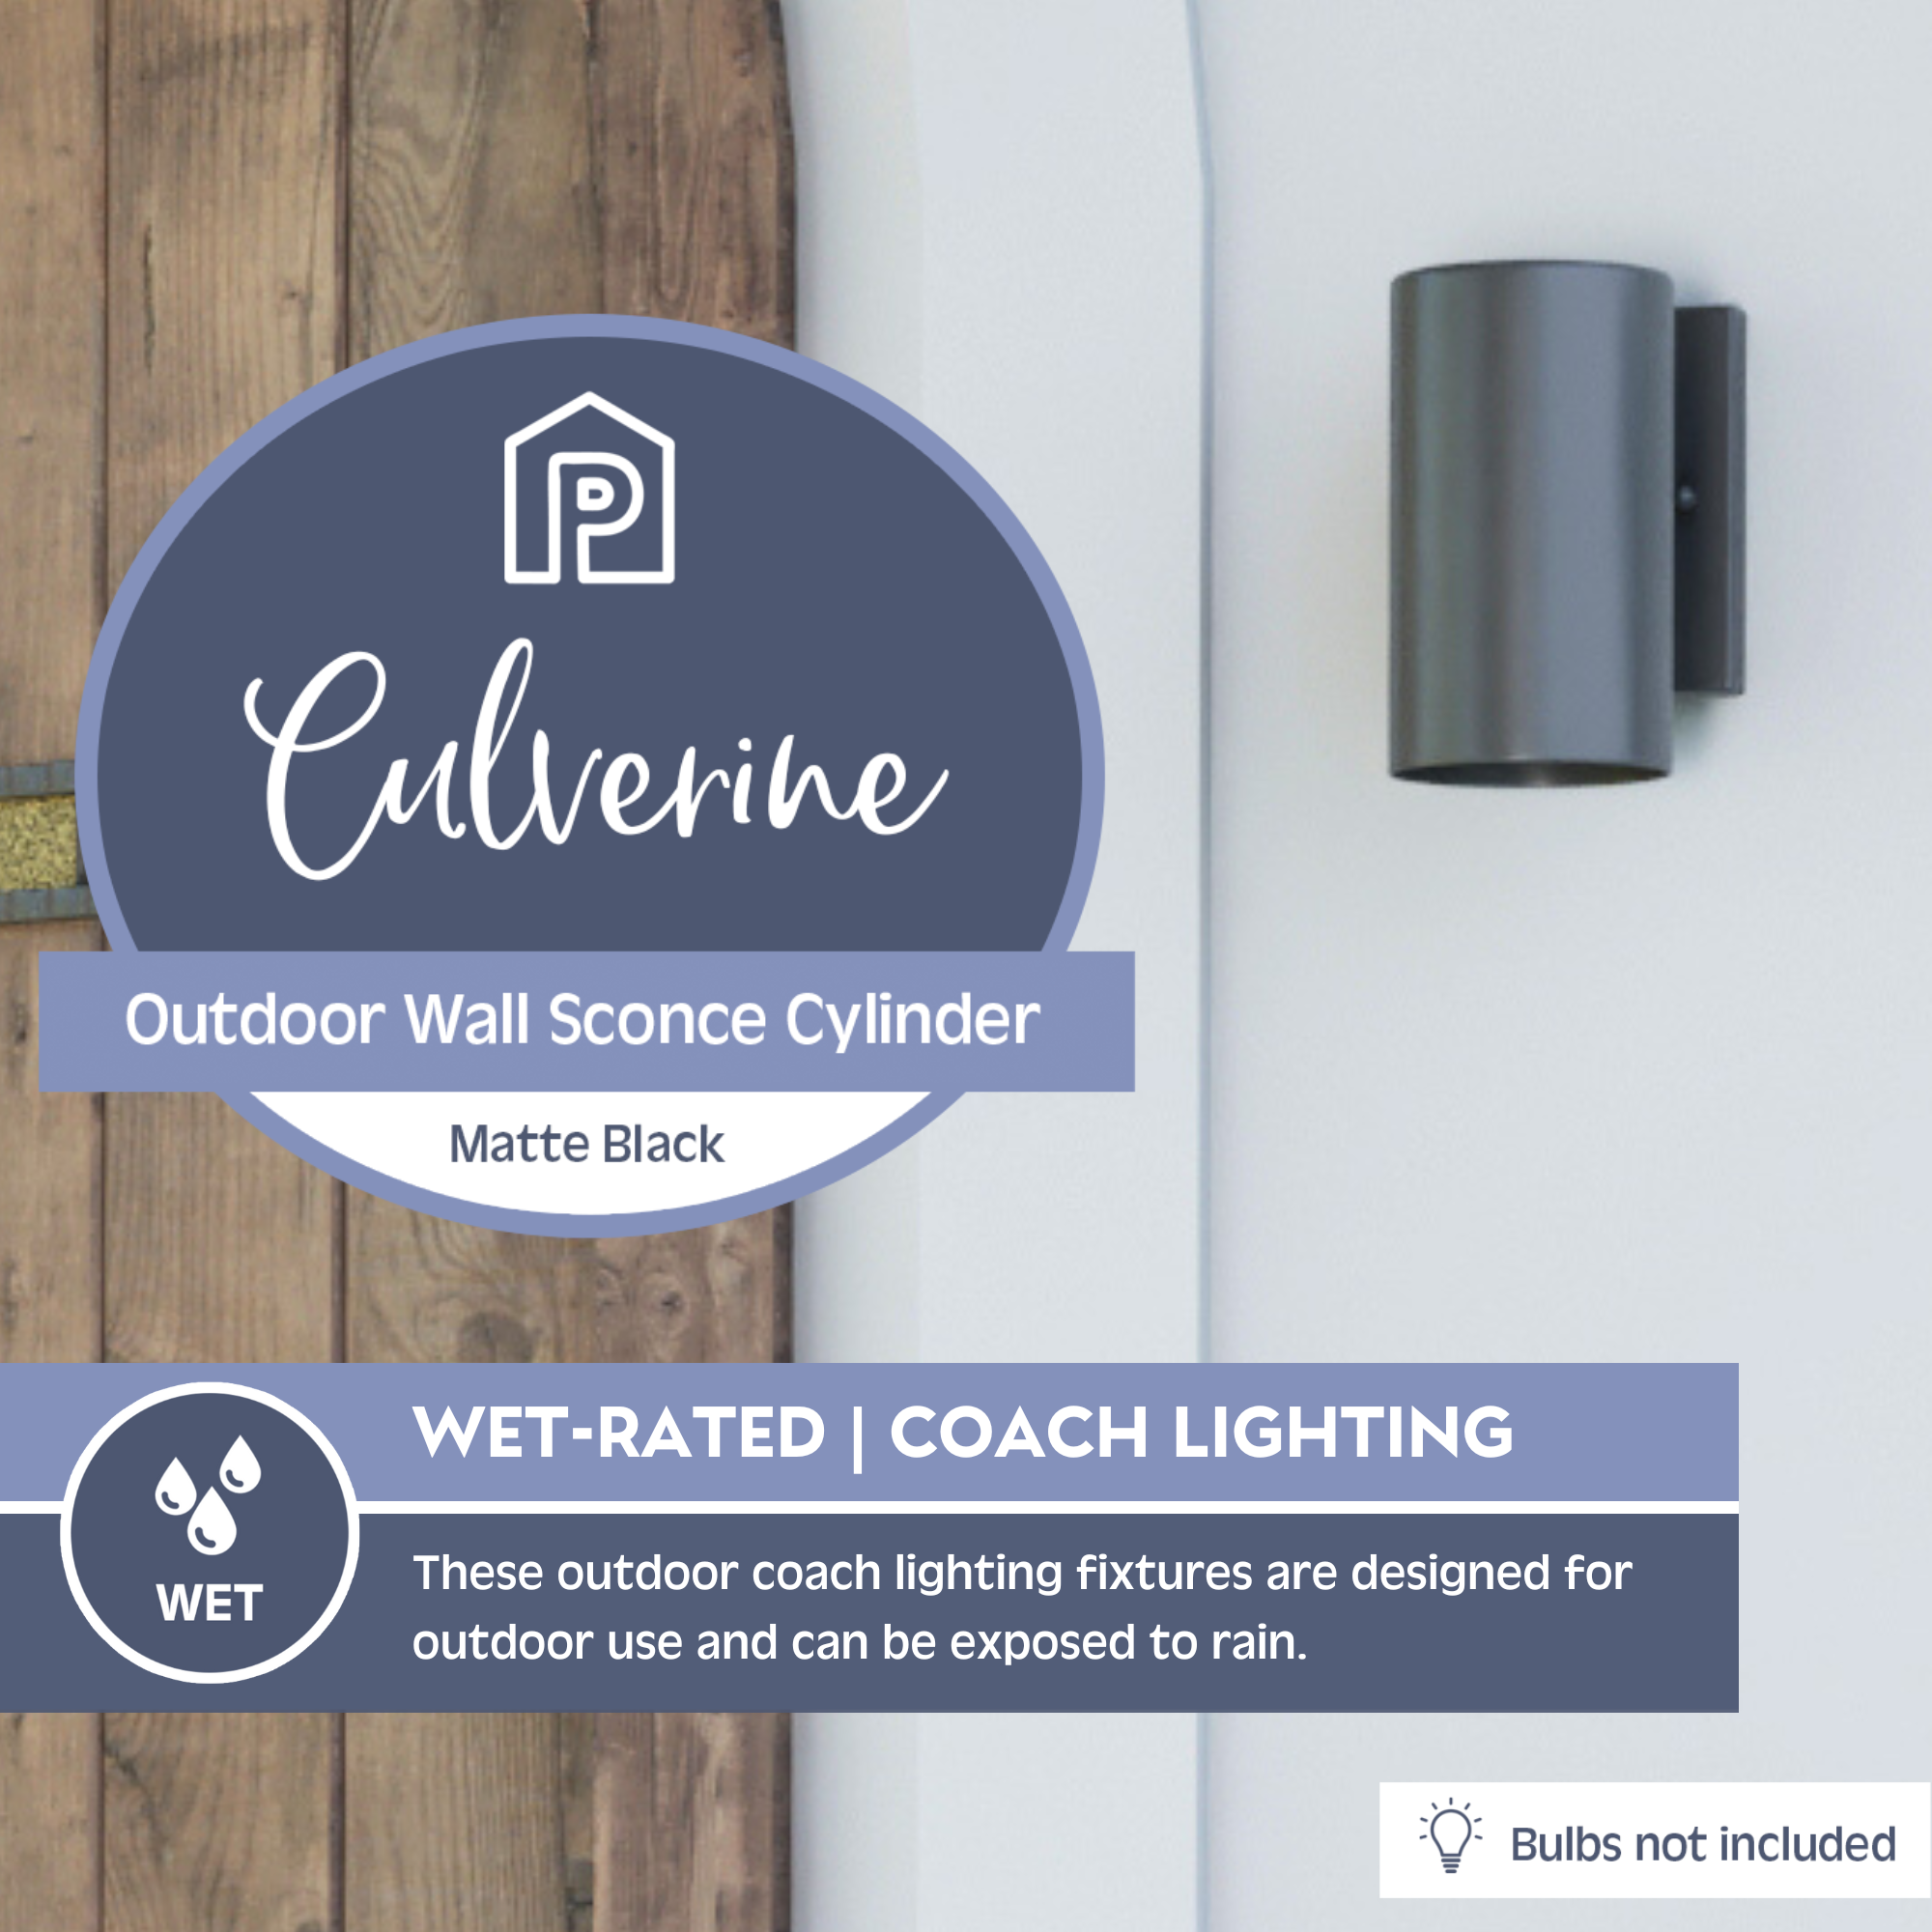 Culverine, Wet-Rated Coach Light, Matte Black by Prominence Home